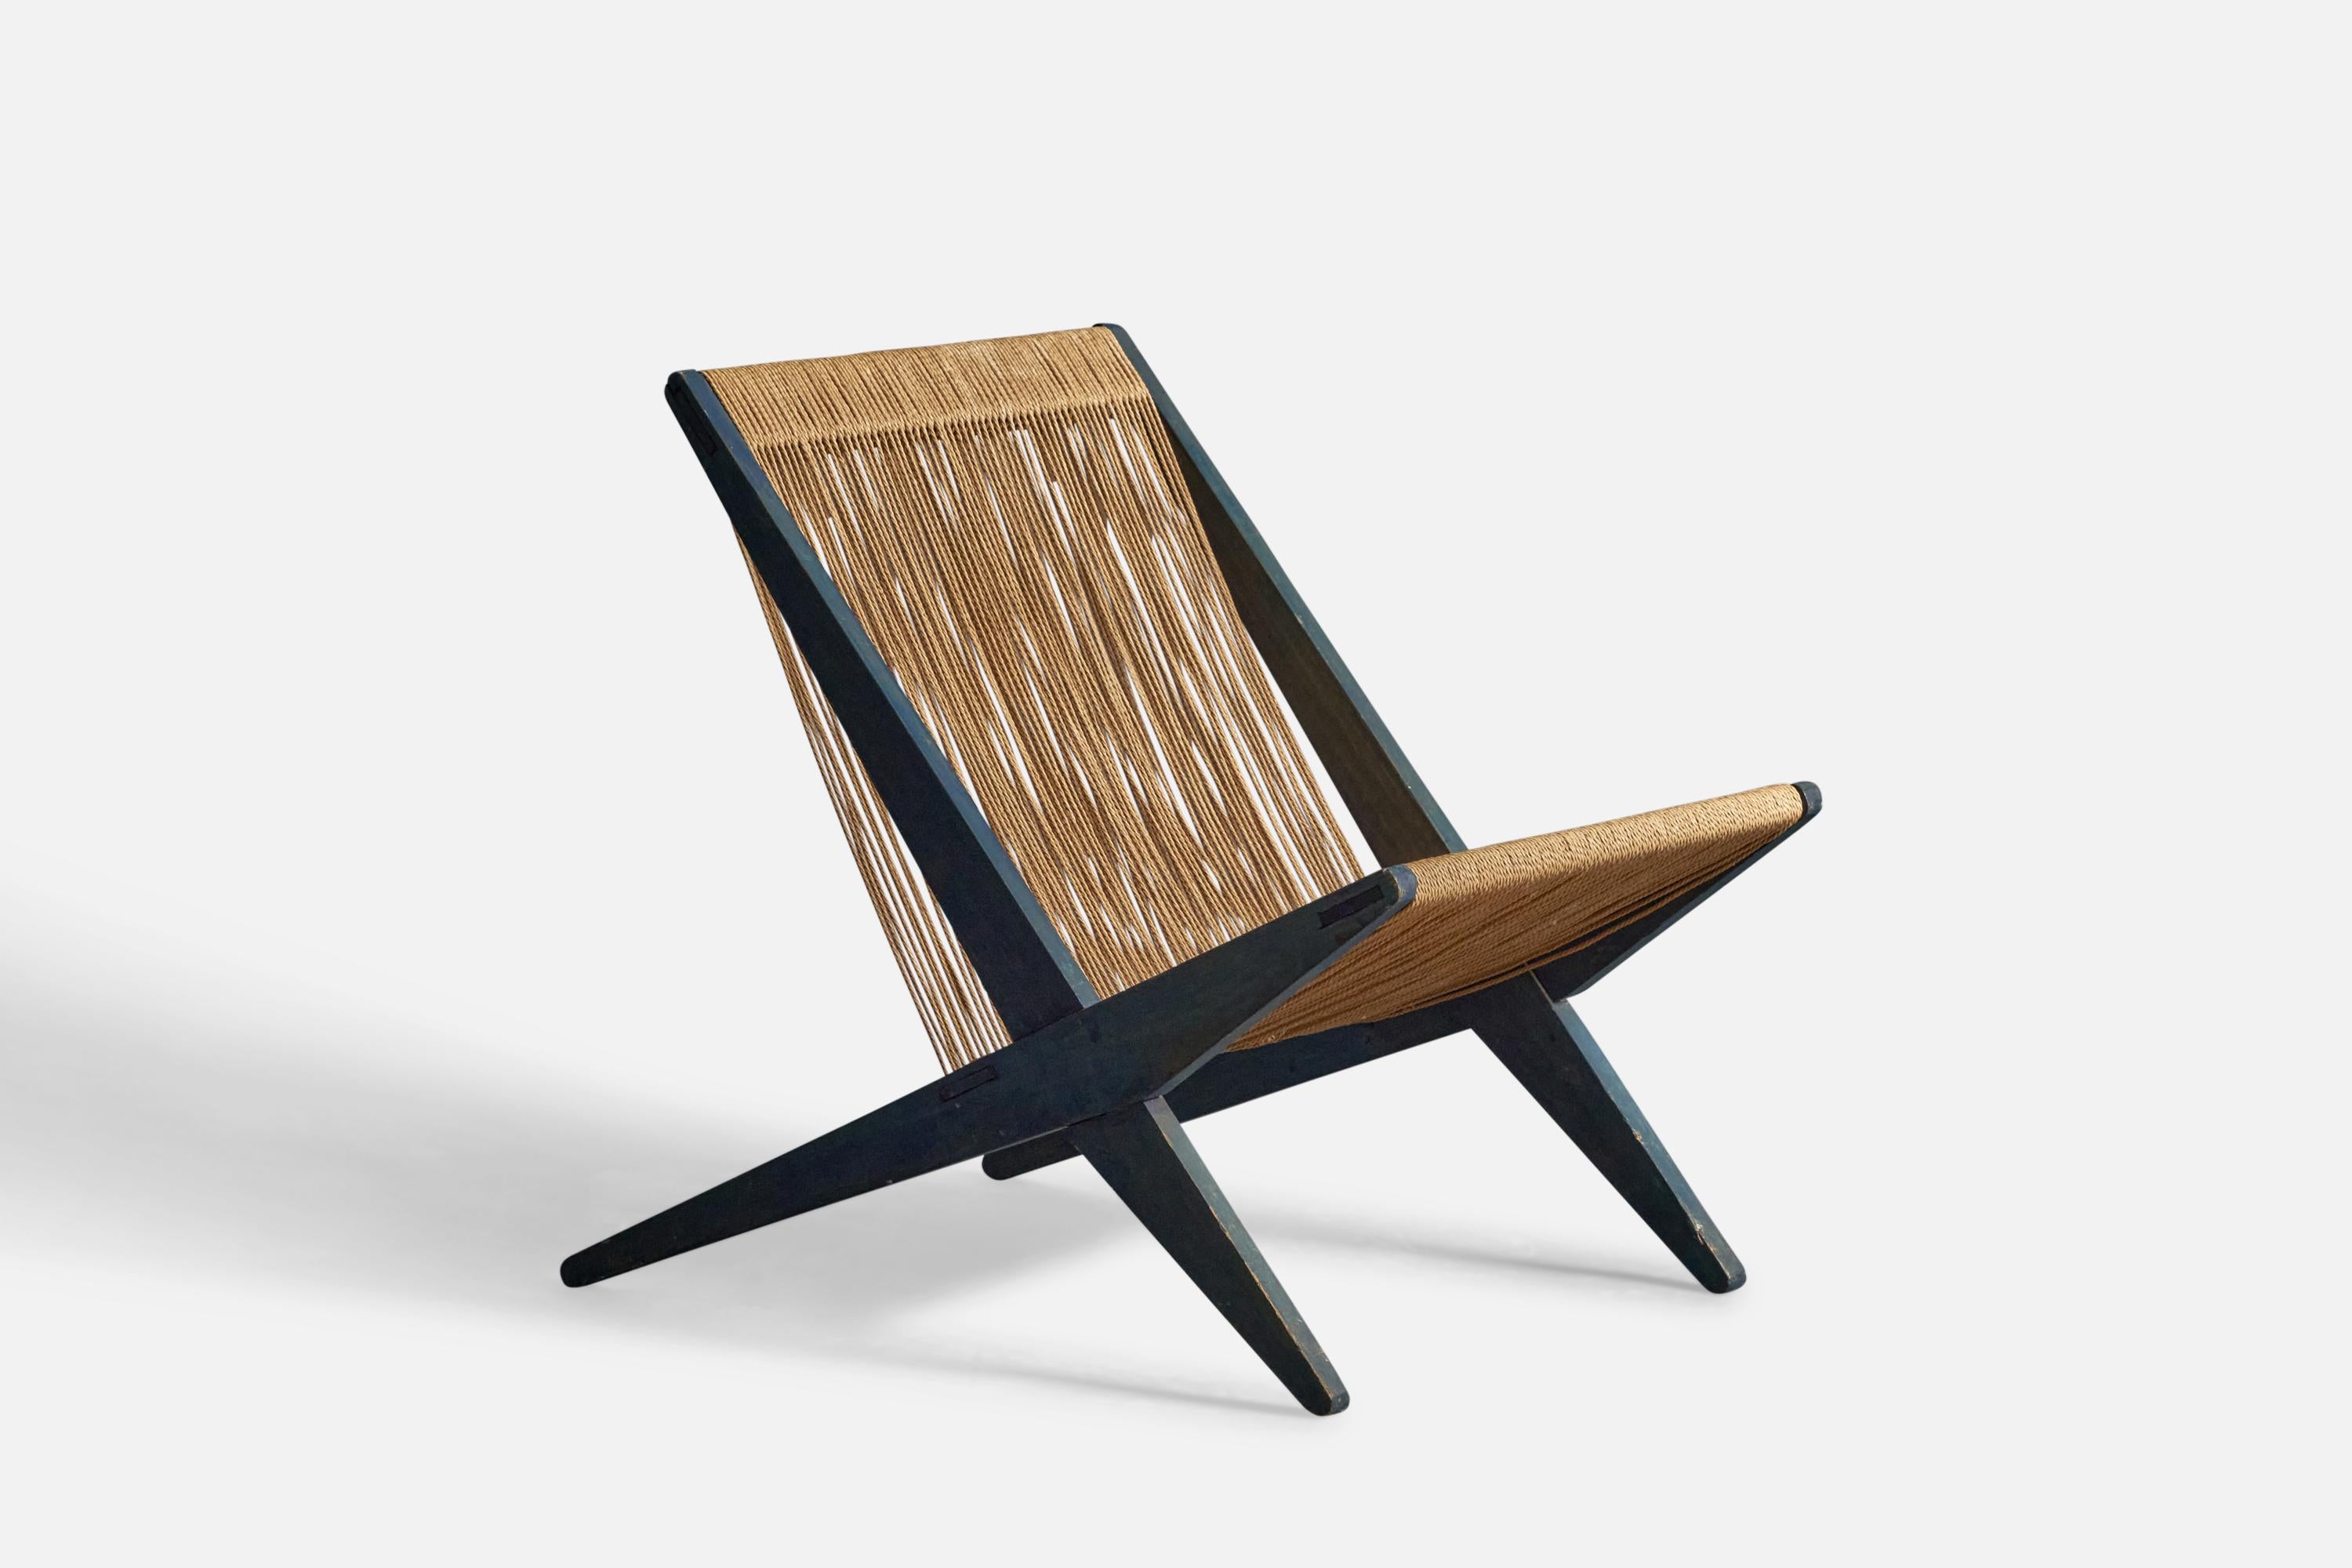 A blue-painted pine and papercord lounge chair or slipper chair, design attributed to Poul Kjærholm, Denmark, 1960s.
